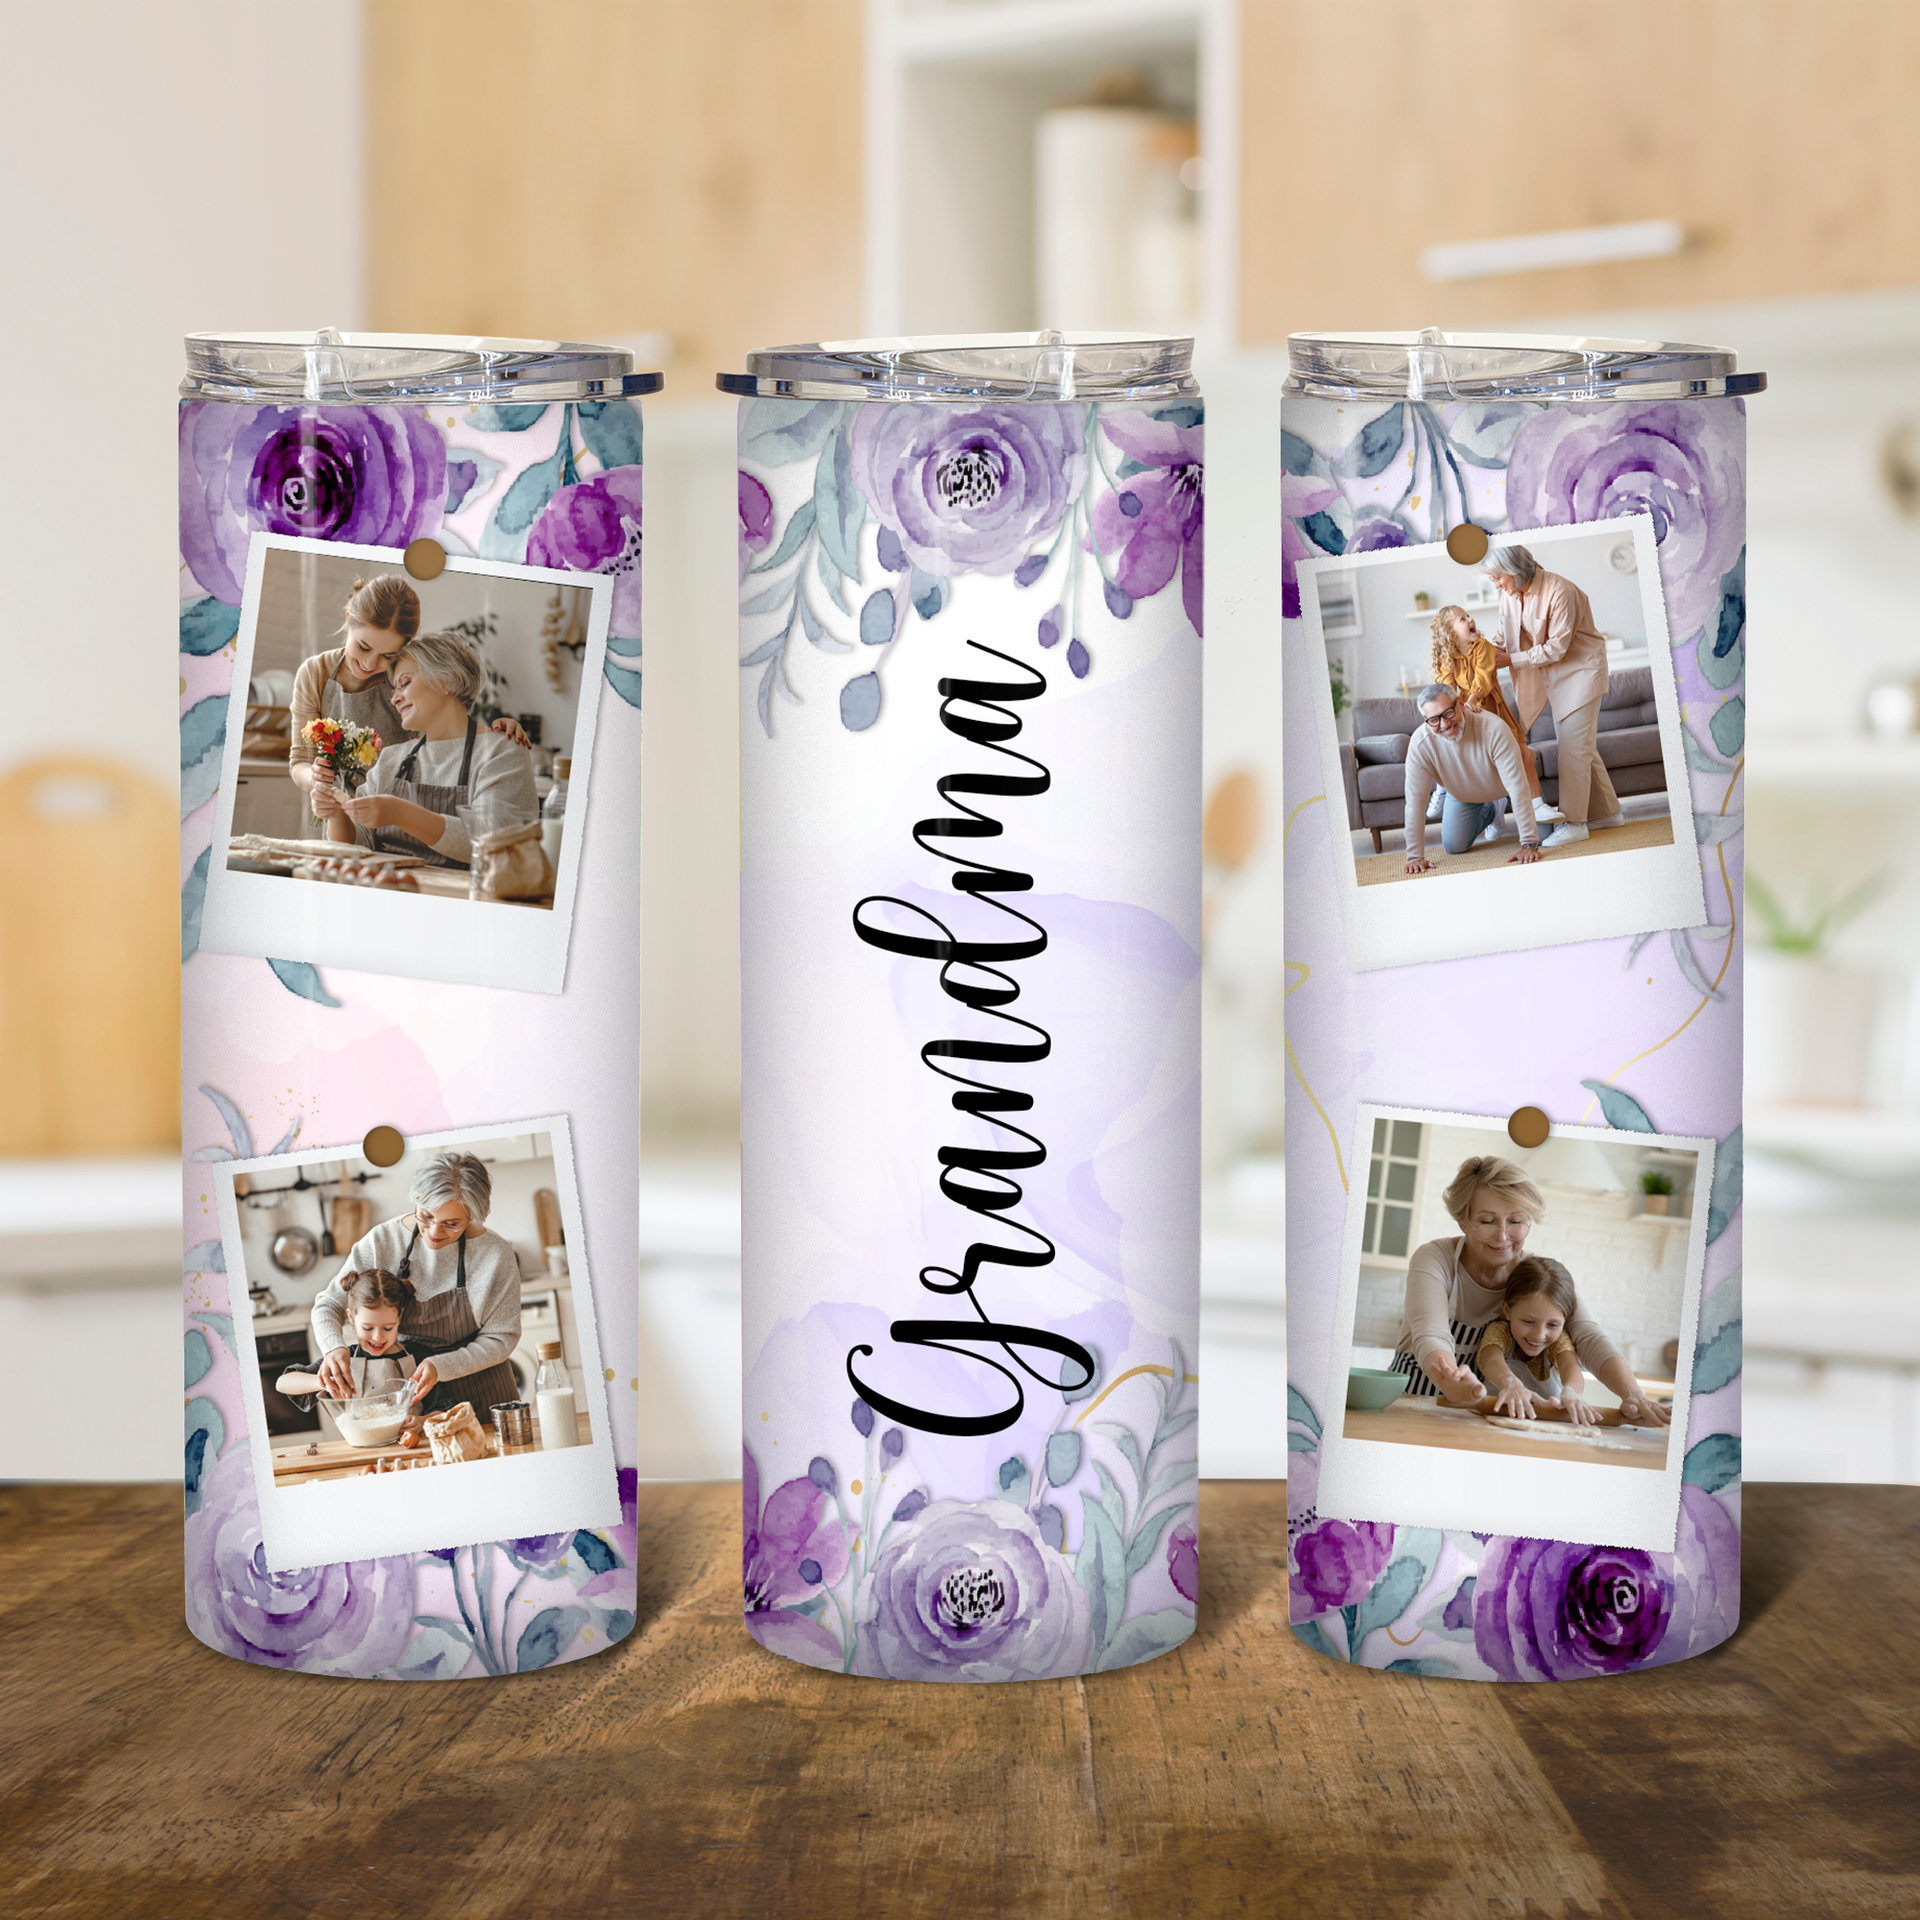 Mom Tumbler Personalized - Mother's Day Tumbler - Grandparent's Day - –  kenziesboutique1